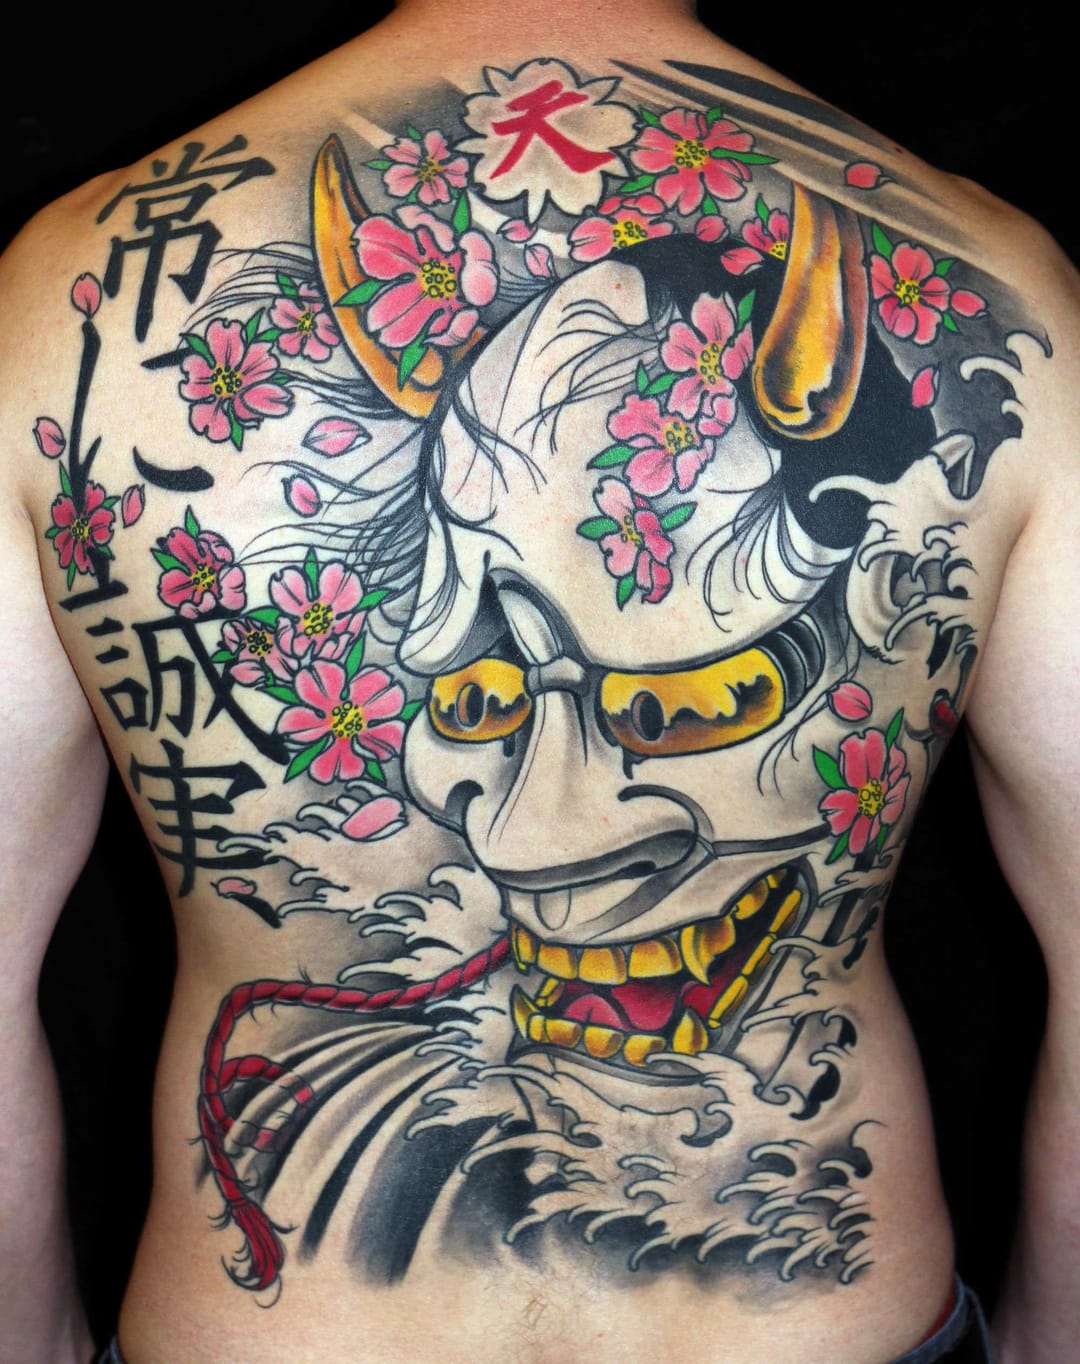 Japanese Hannya Tattoo On Full Back by Dave Fried